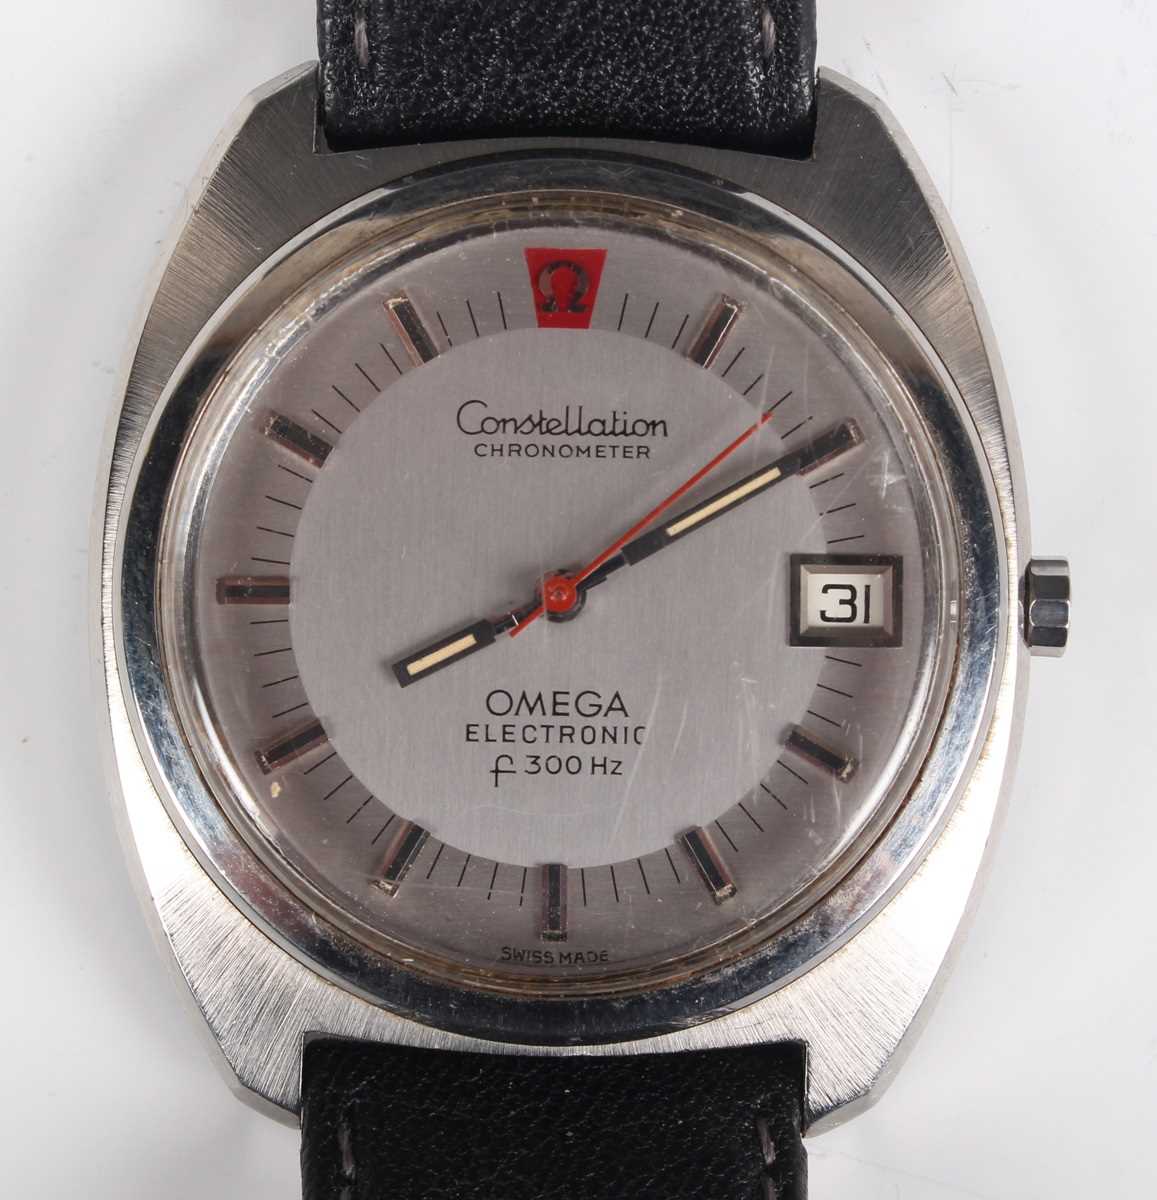 An Omega Constellation Chronometer Electronic F300Hz, circa 1972, the signed and jewelled 1250